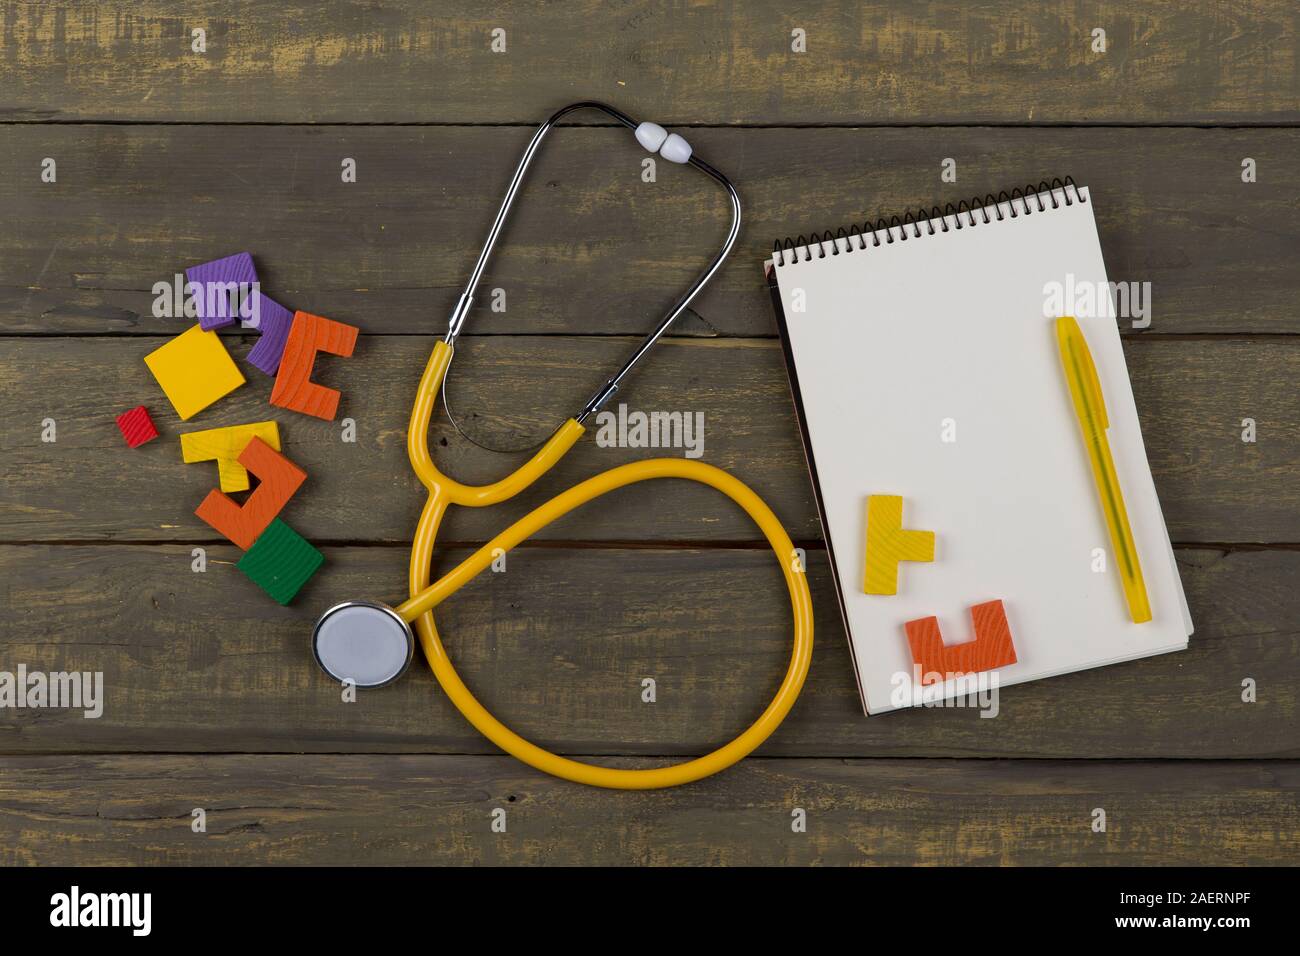 Children's healthy development concept - blank notepad, yellow stethoscope, colorful wooden jigsaw puzzles on wooden background Stock Photo